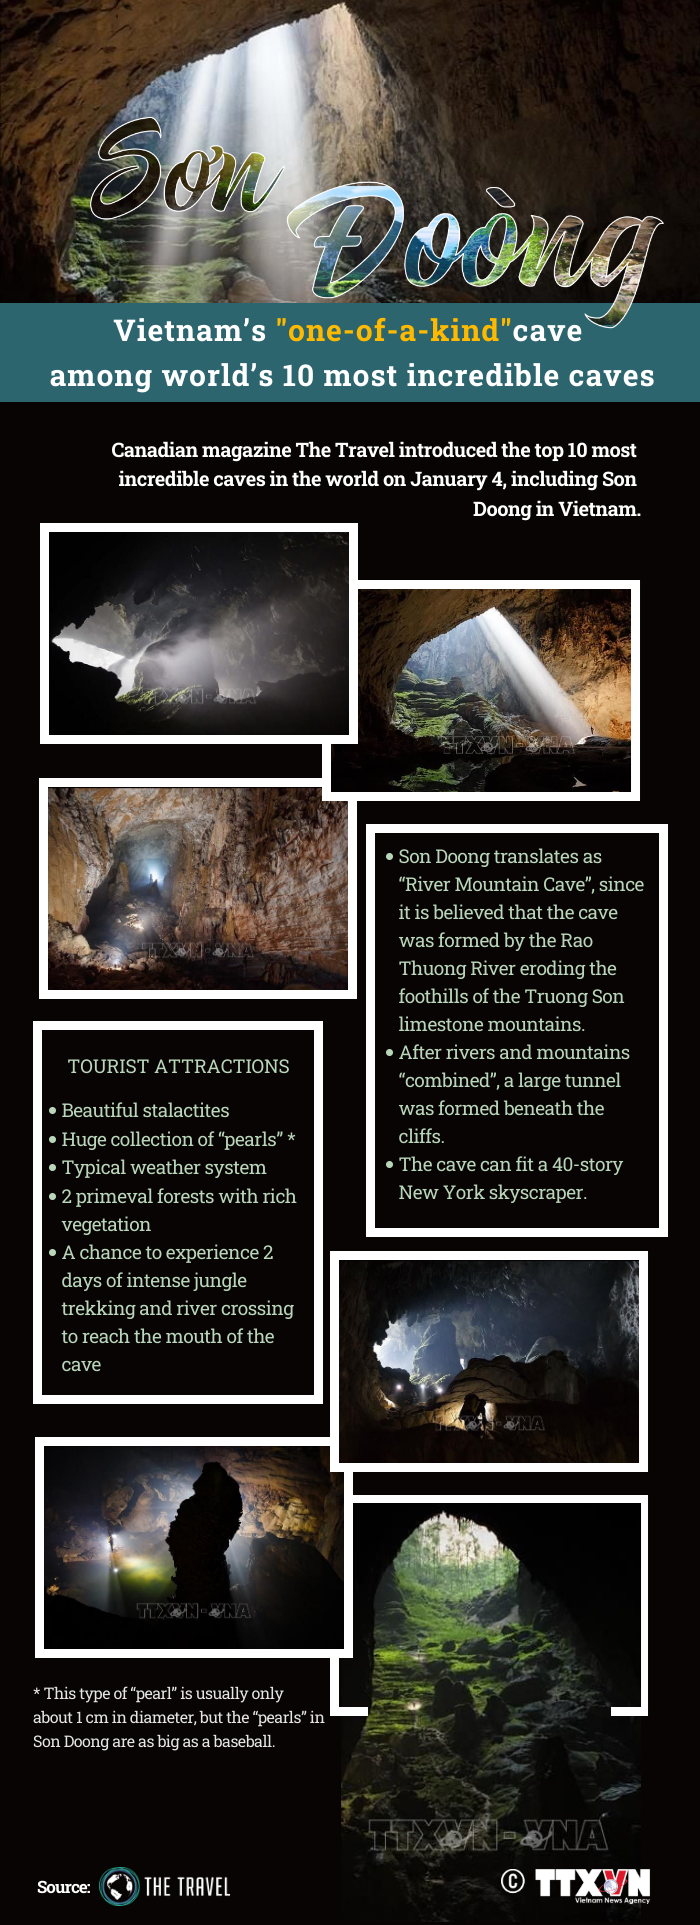 Son Doong among most incredible caves worldwide hinh anh 1